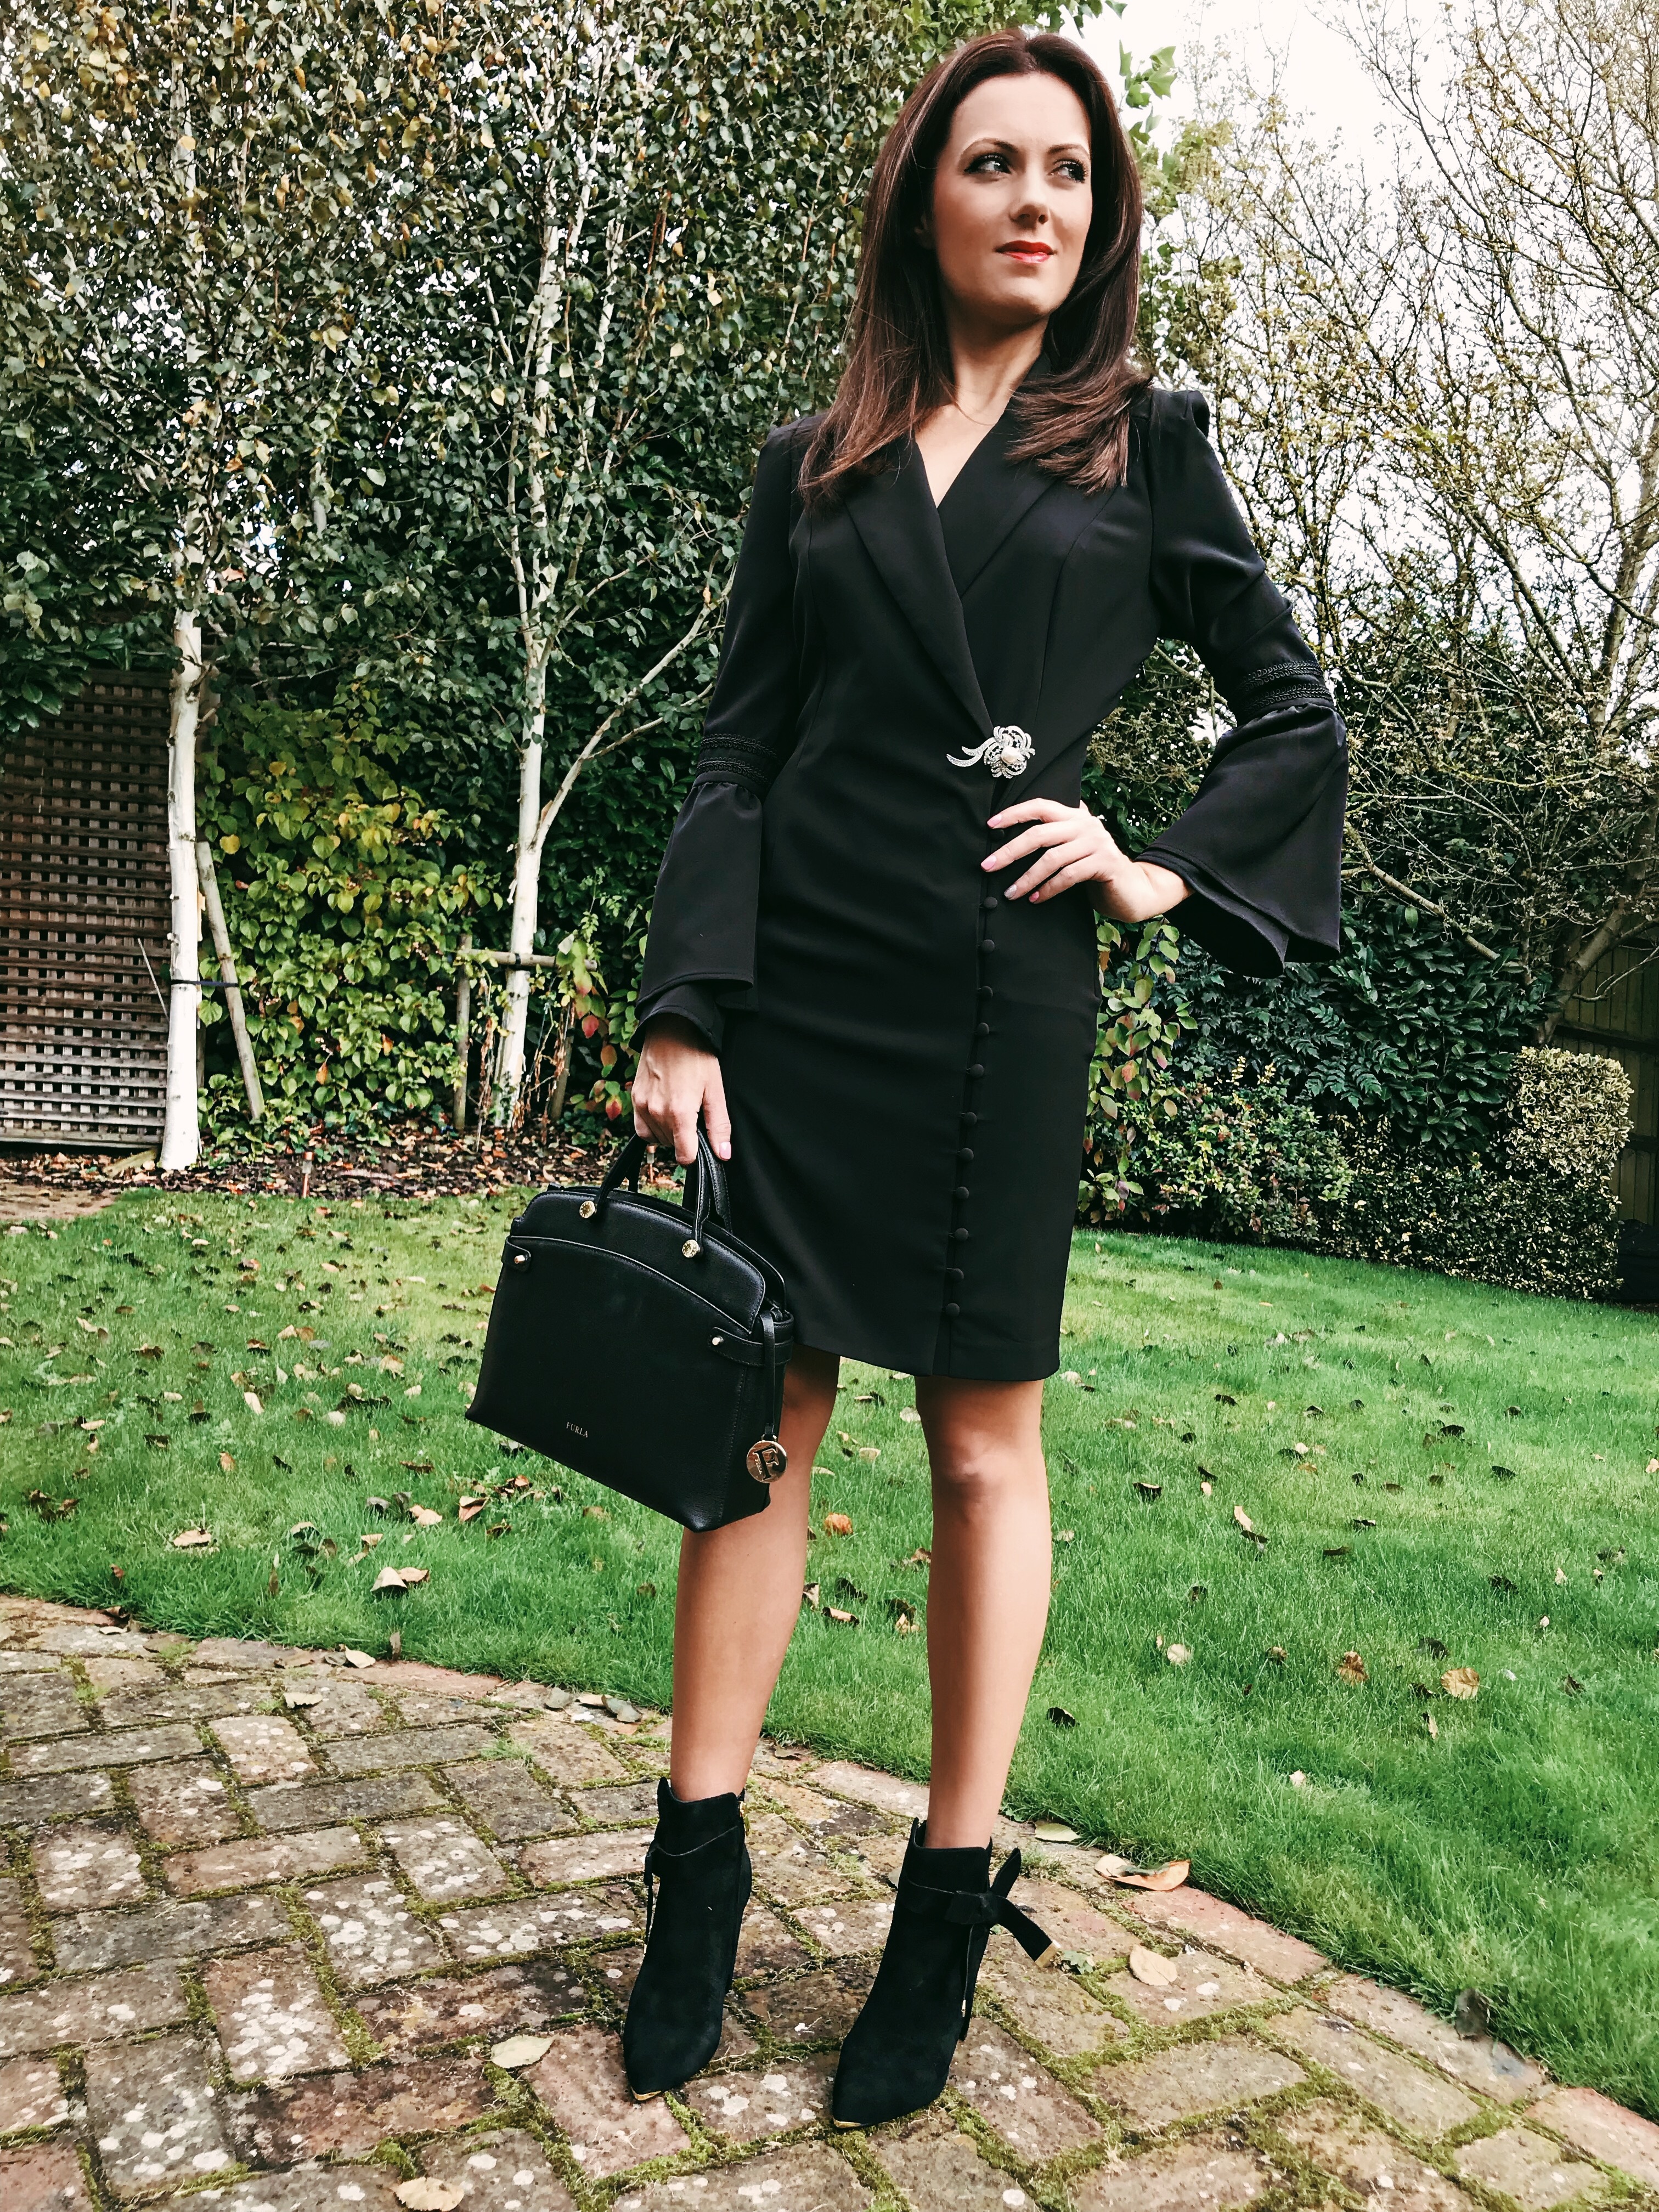 Ted Baker SAILLY Bow detail suede ankle boots | Office Over Knee Perspex Heel Boot | Michelle Keegan Button Side Tux Dress | Prada Baroque sunglasses | Accessorize necklace | Swarovski earrings | Furla handbag | Elegant Duchess Boutique brooch